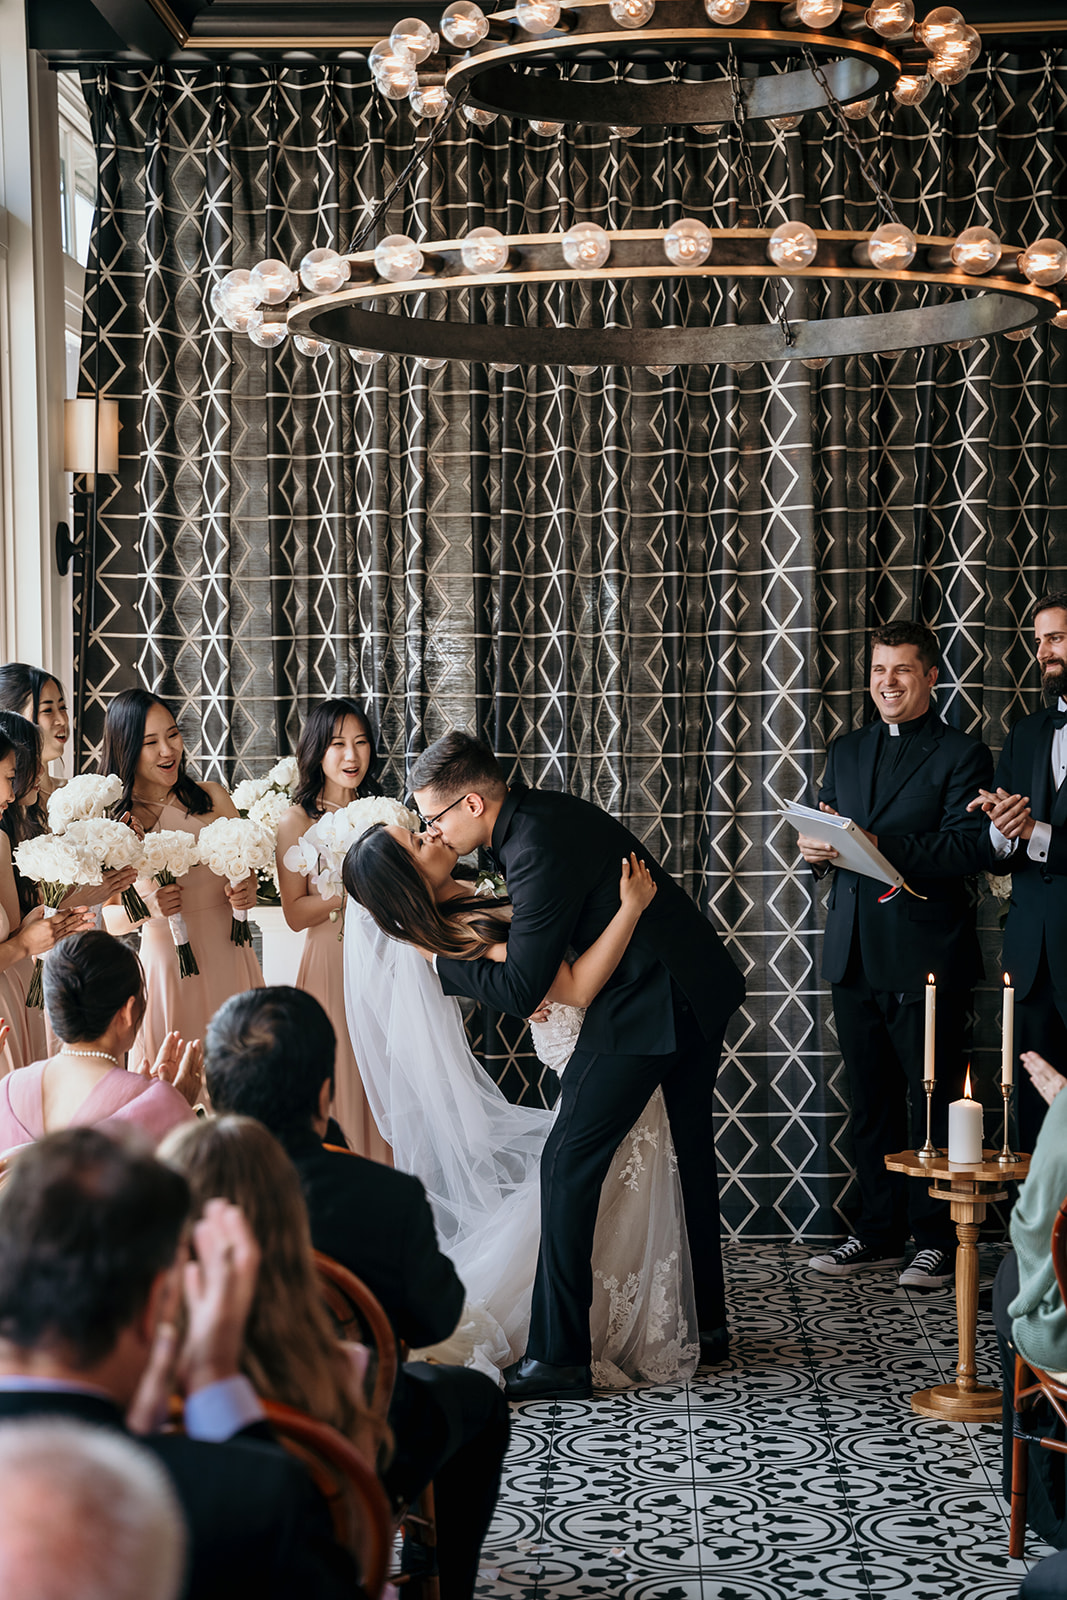 Timeless wedding at the Curtiss Hotel in Buffalo, NY